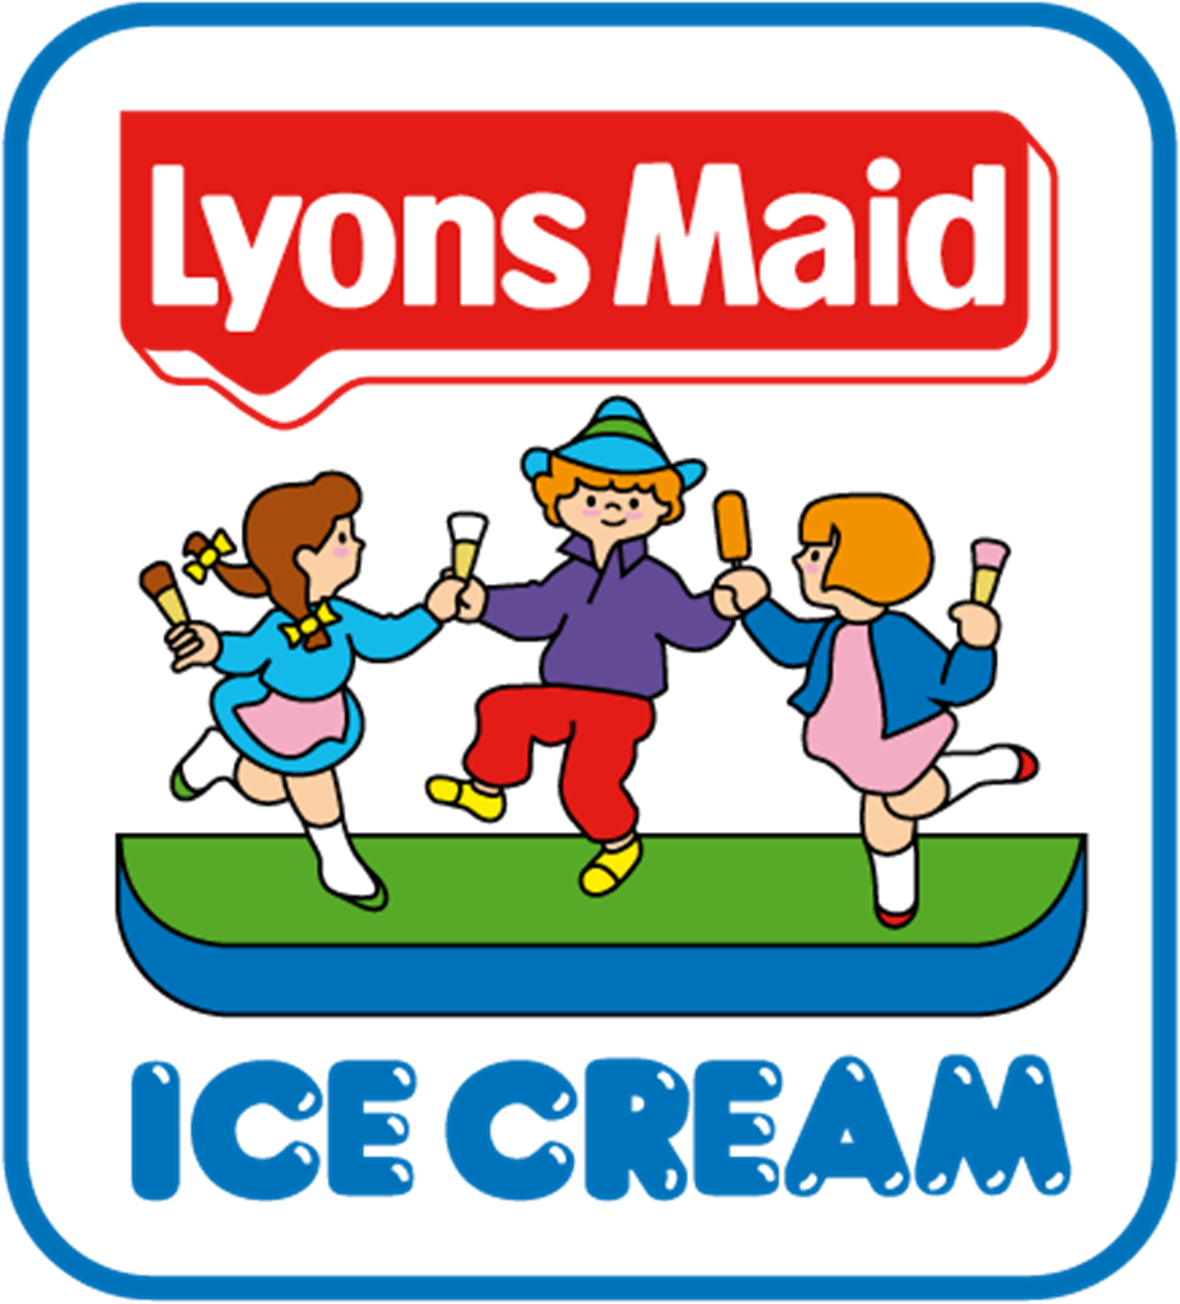 There May Still Be Large Amounts Of Delicious Ice Based - Lyons Maid Ice Cream Logo (1200x1316)